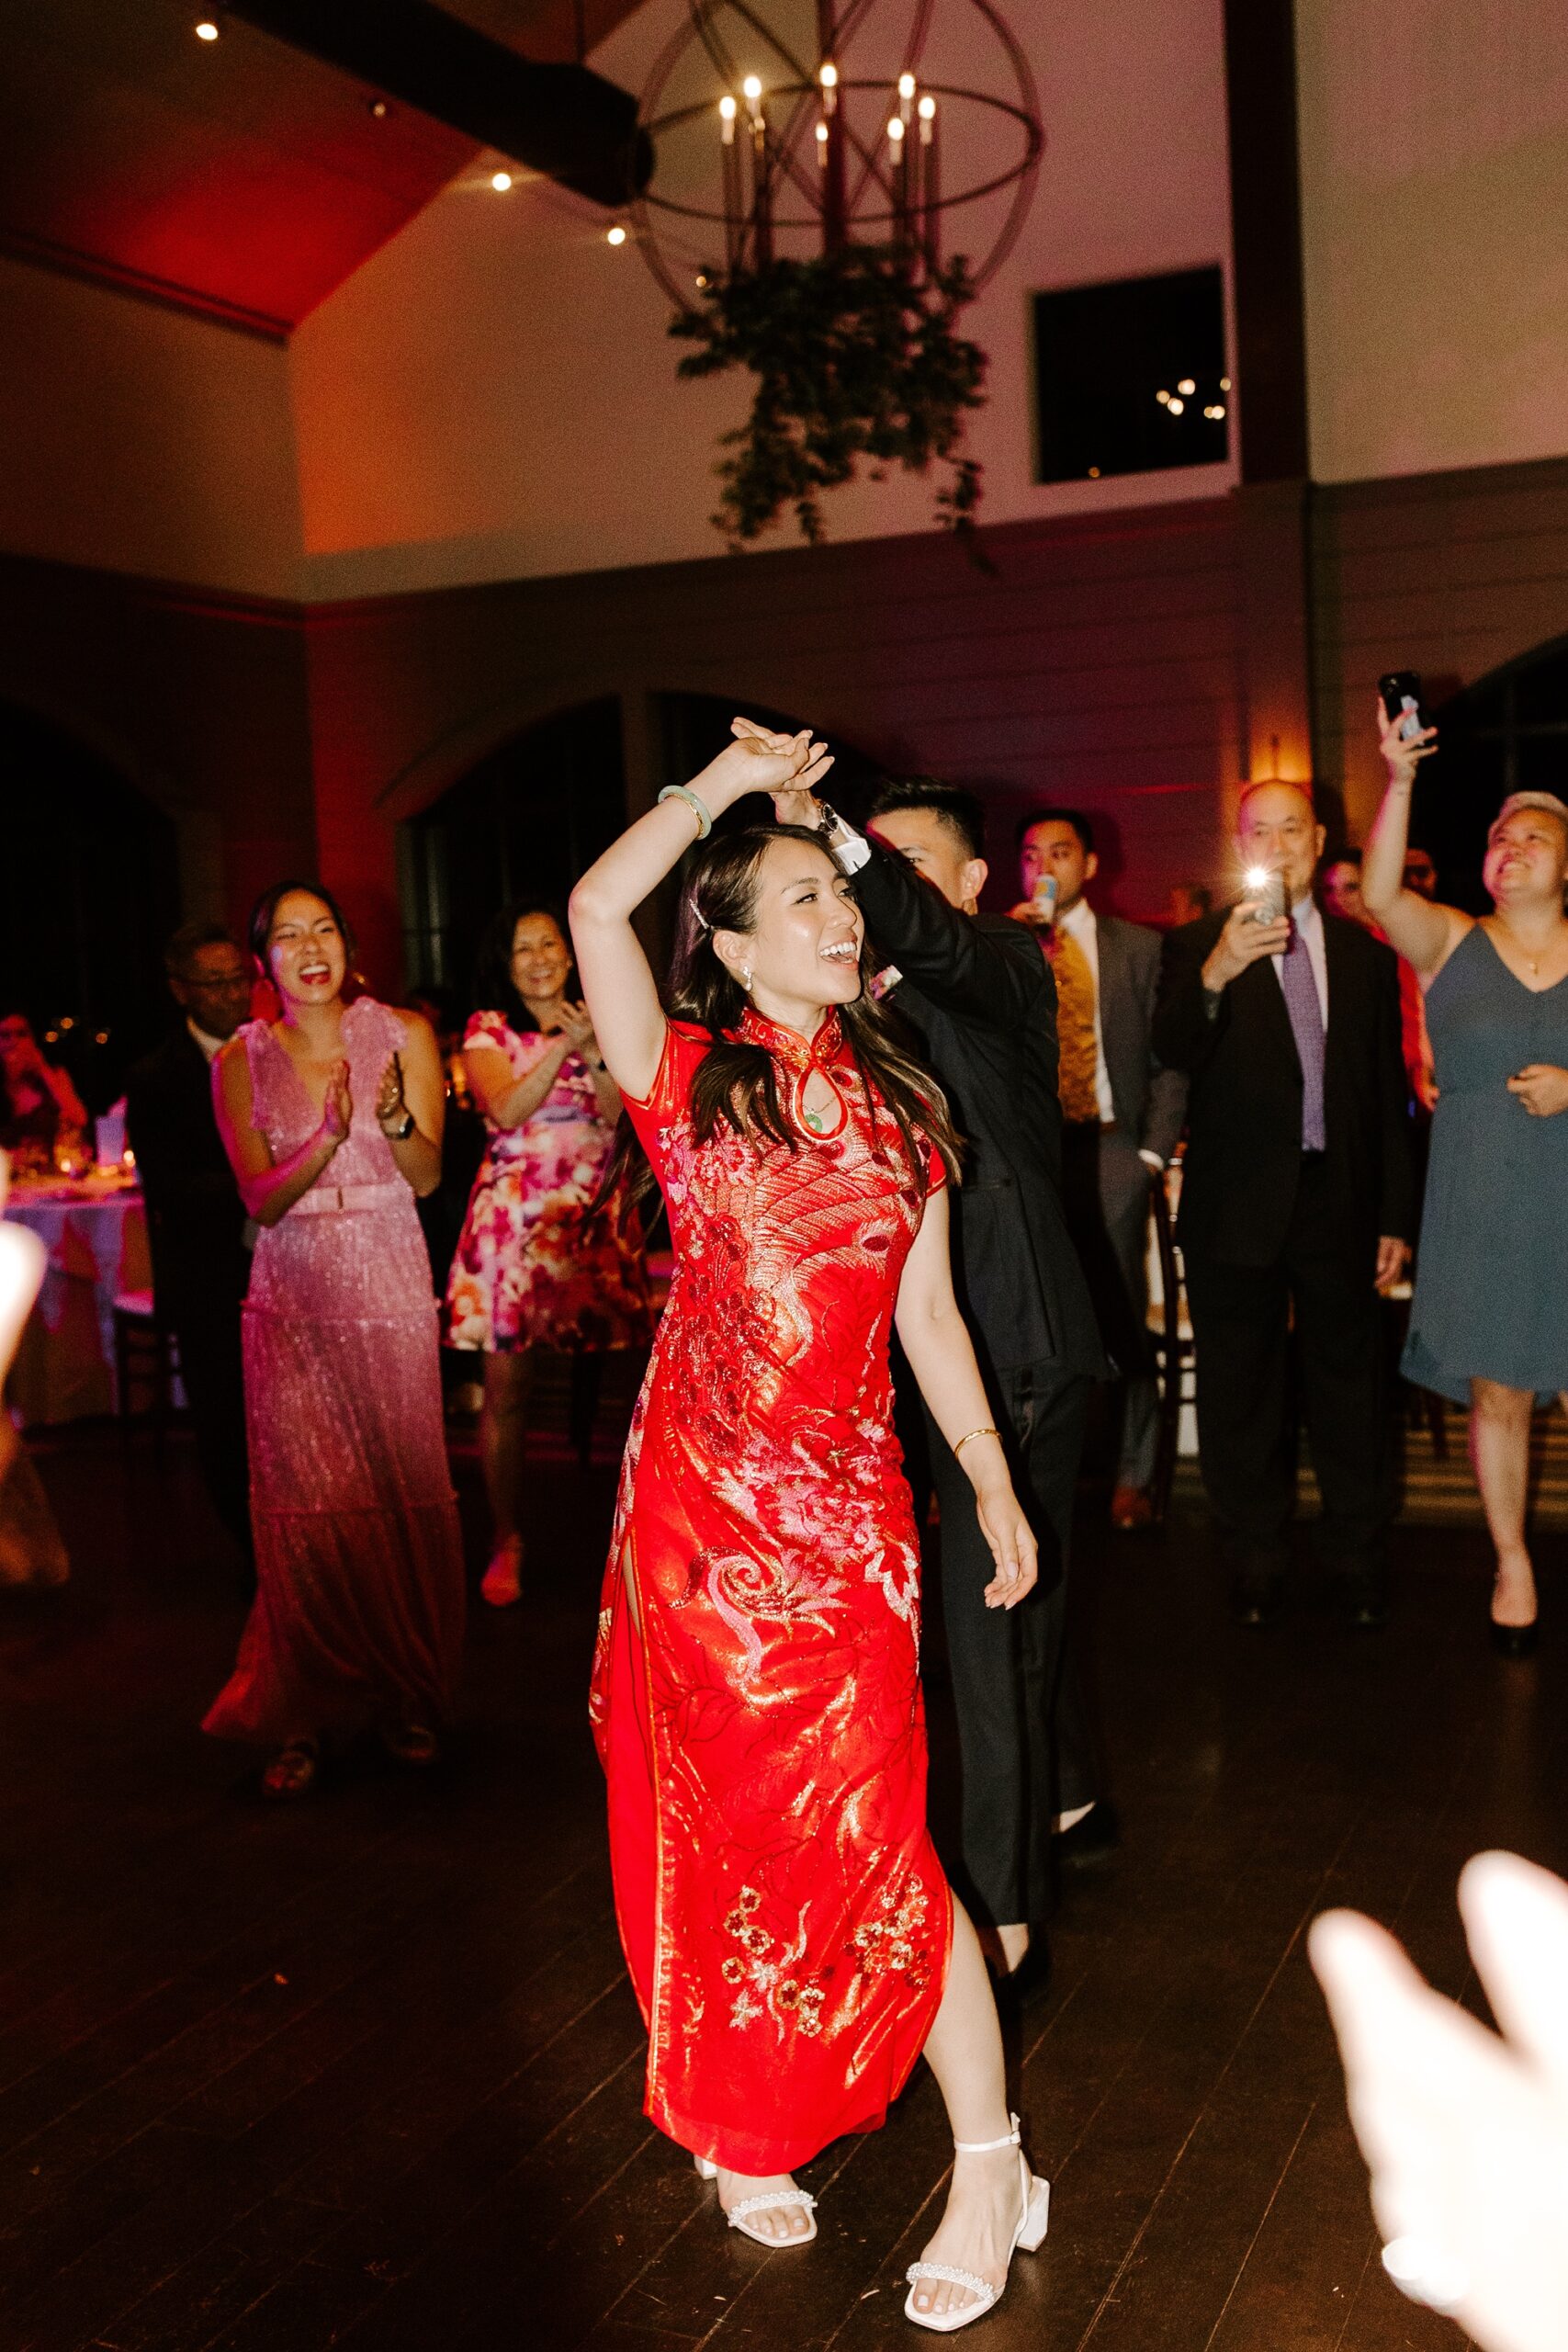 Bride and groom dance at their LaBelle Winery wedding reception